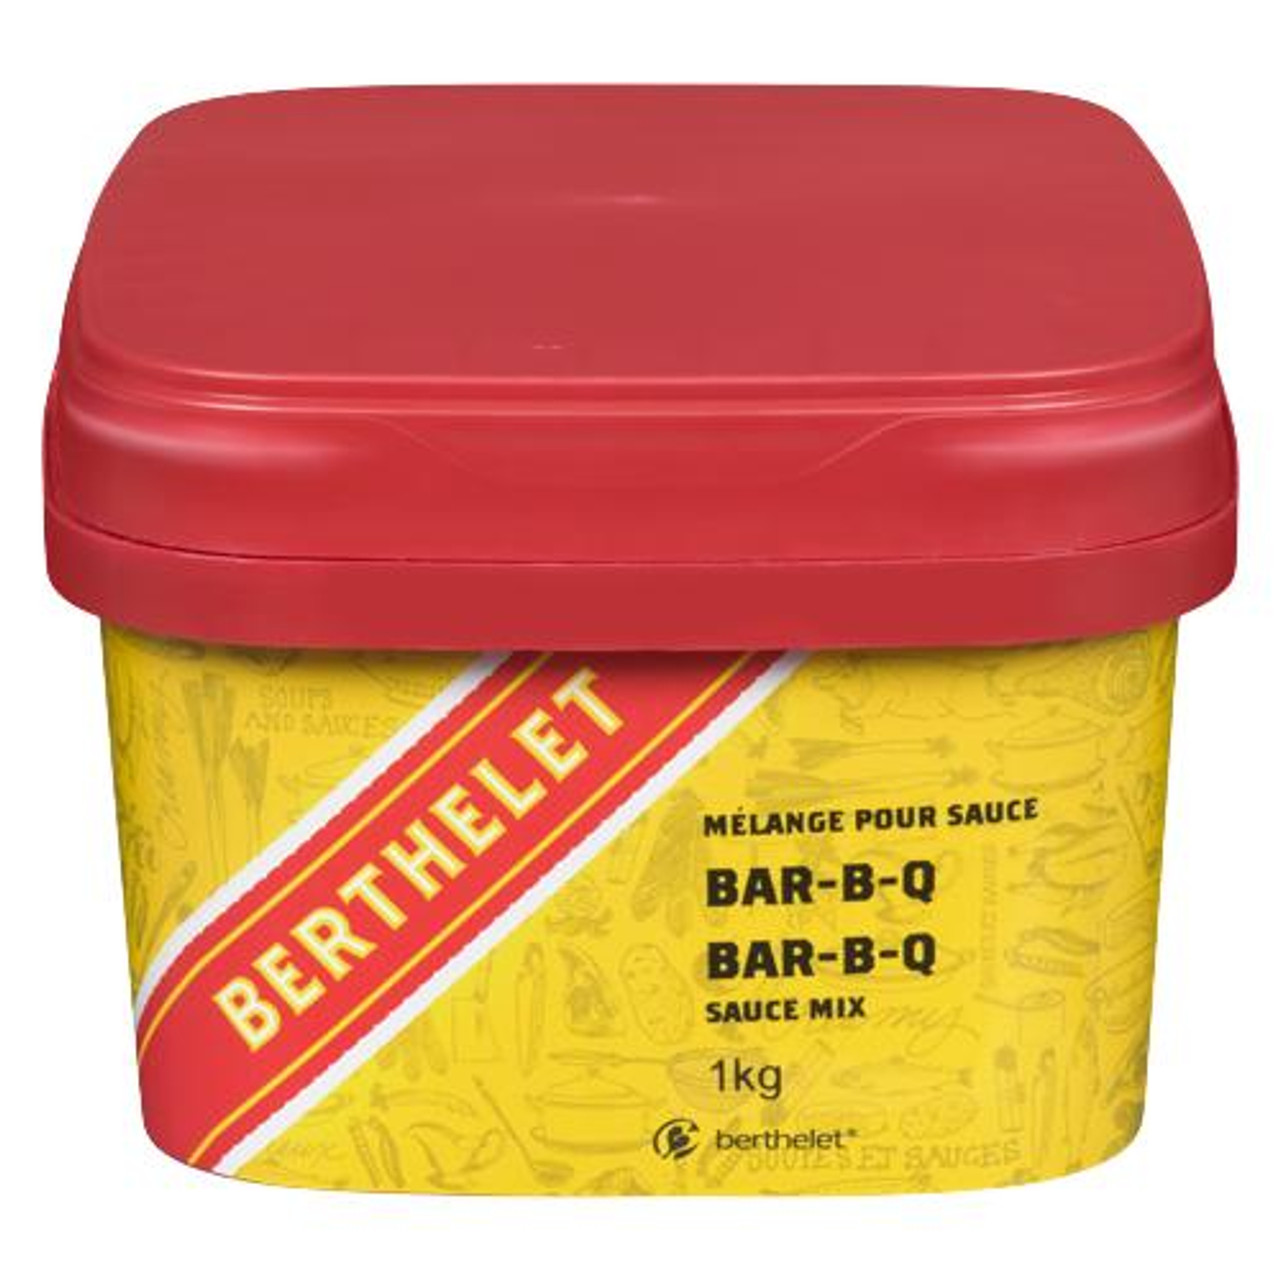  BERTHELET Sauce Mix, Bar-B-Q 1kg - Authentic and Finger-Licking Good 